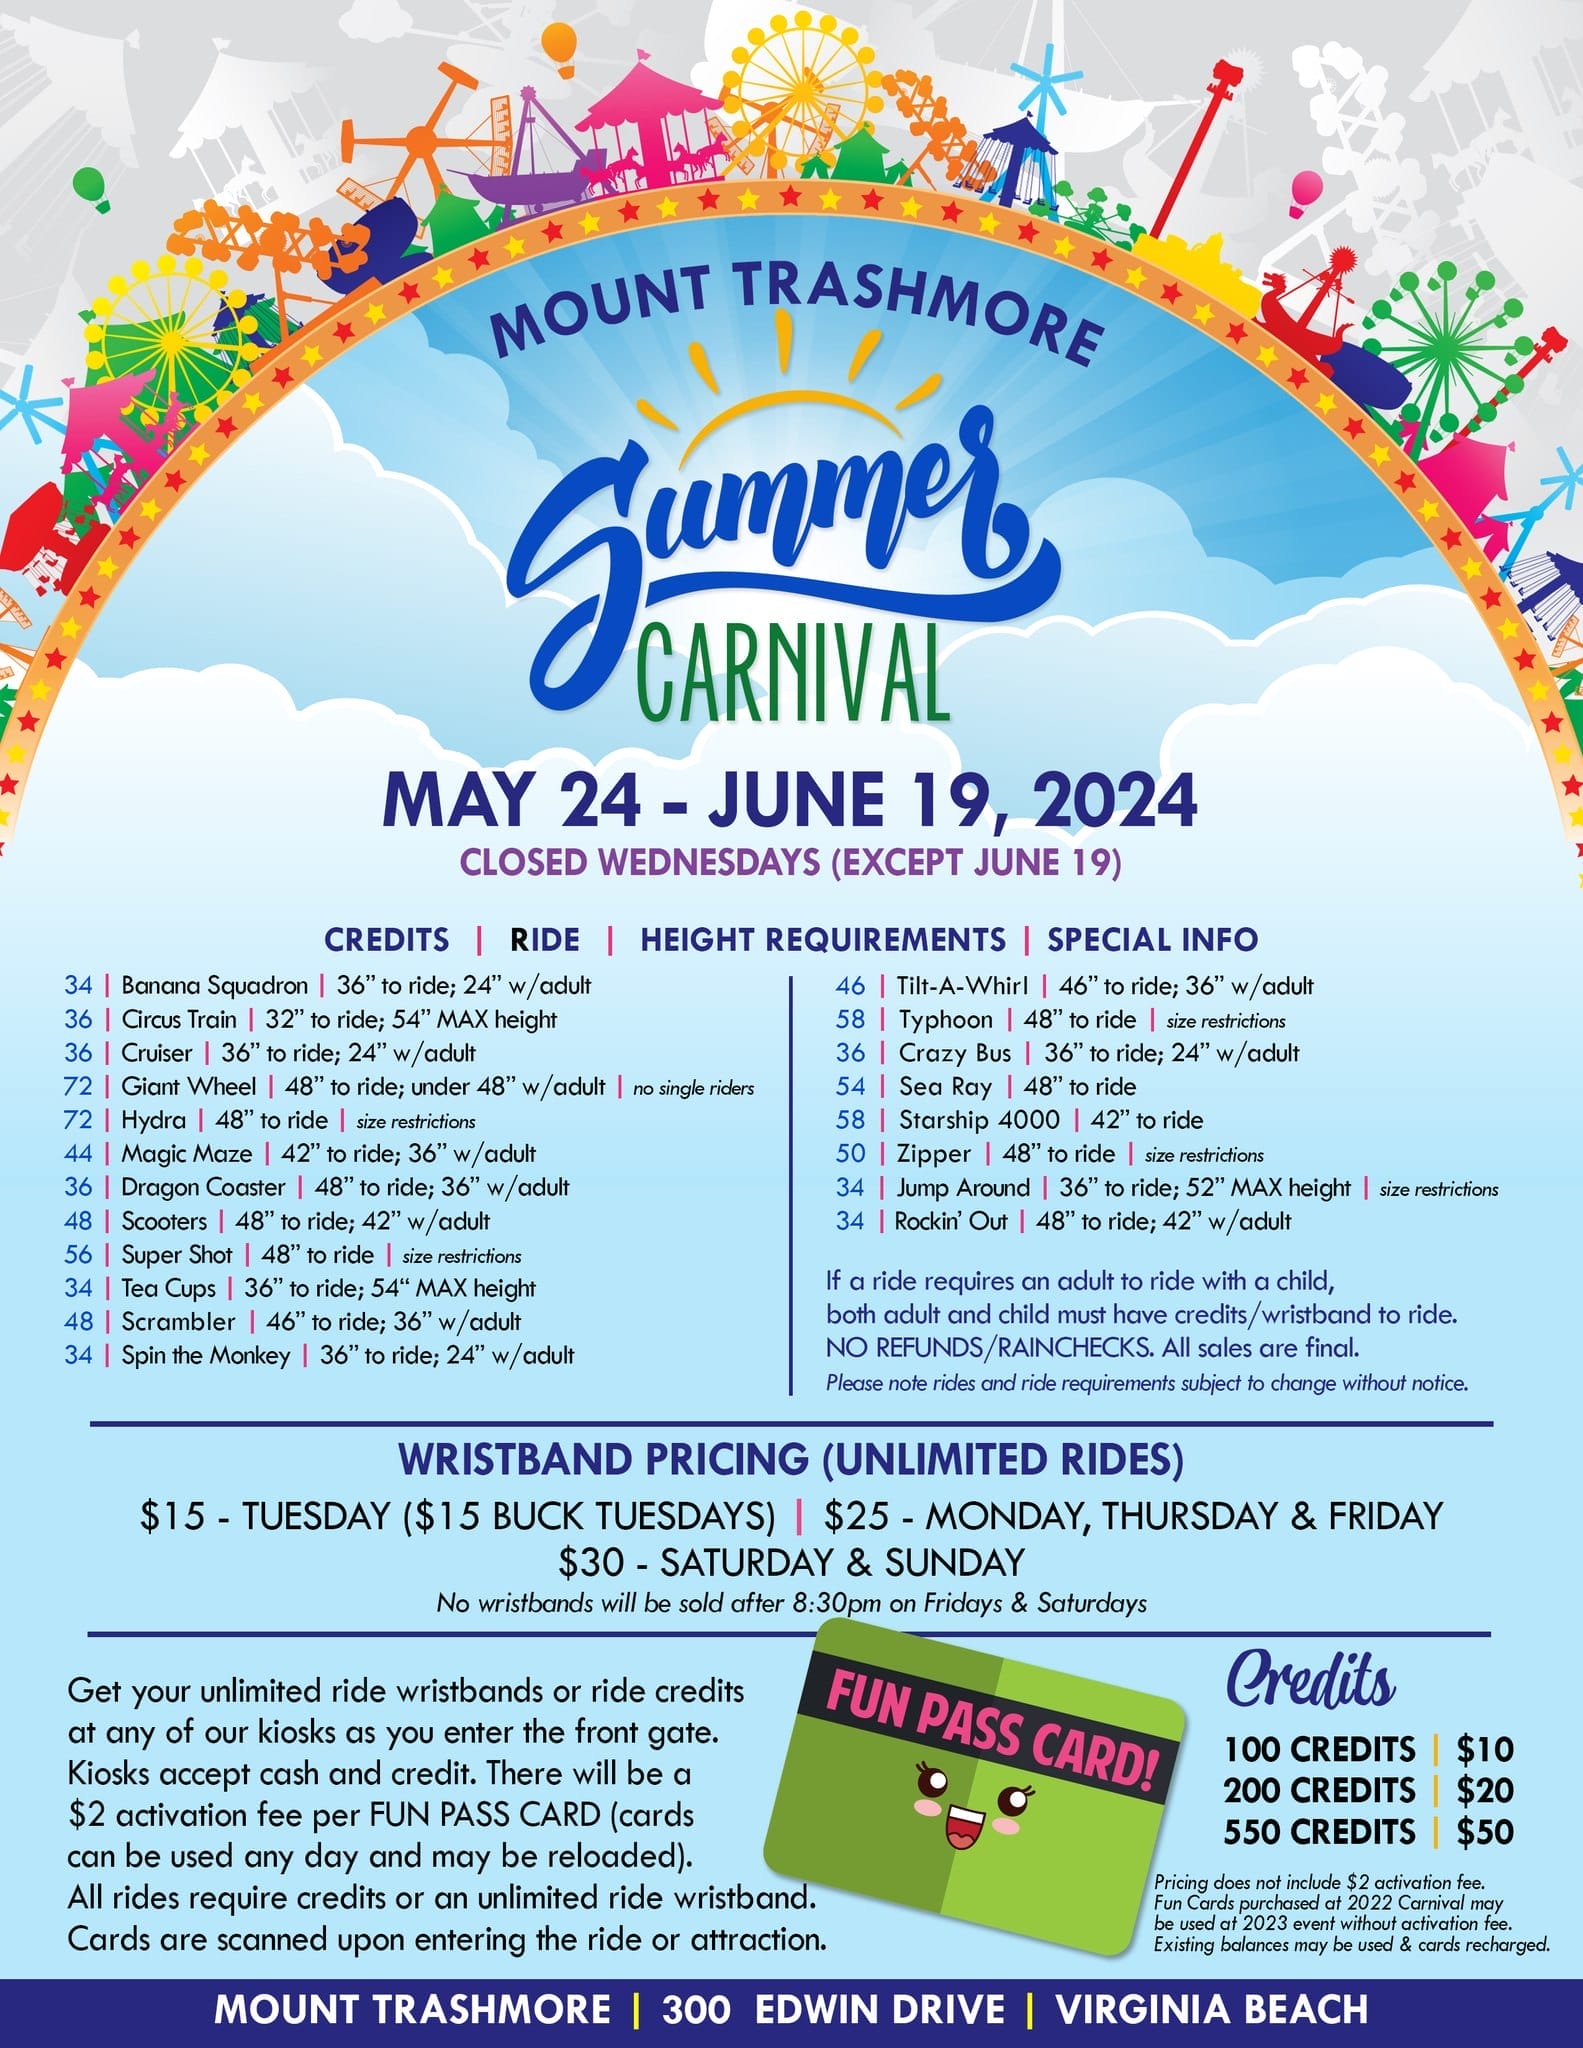 Mt Trashmore Summer Carnival Schedule and Pricing